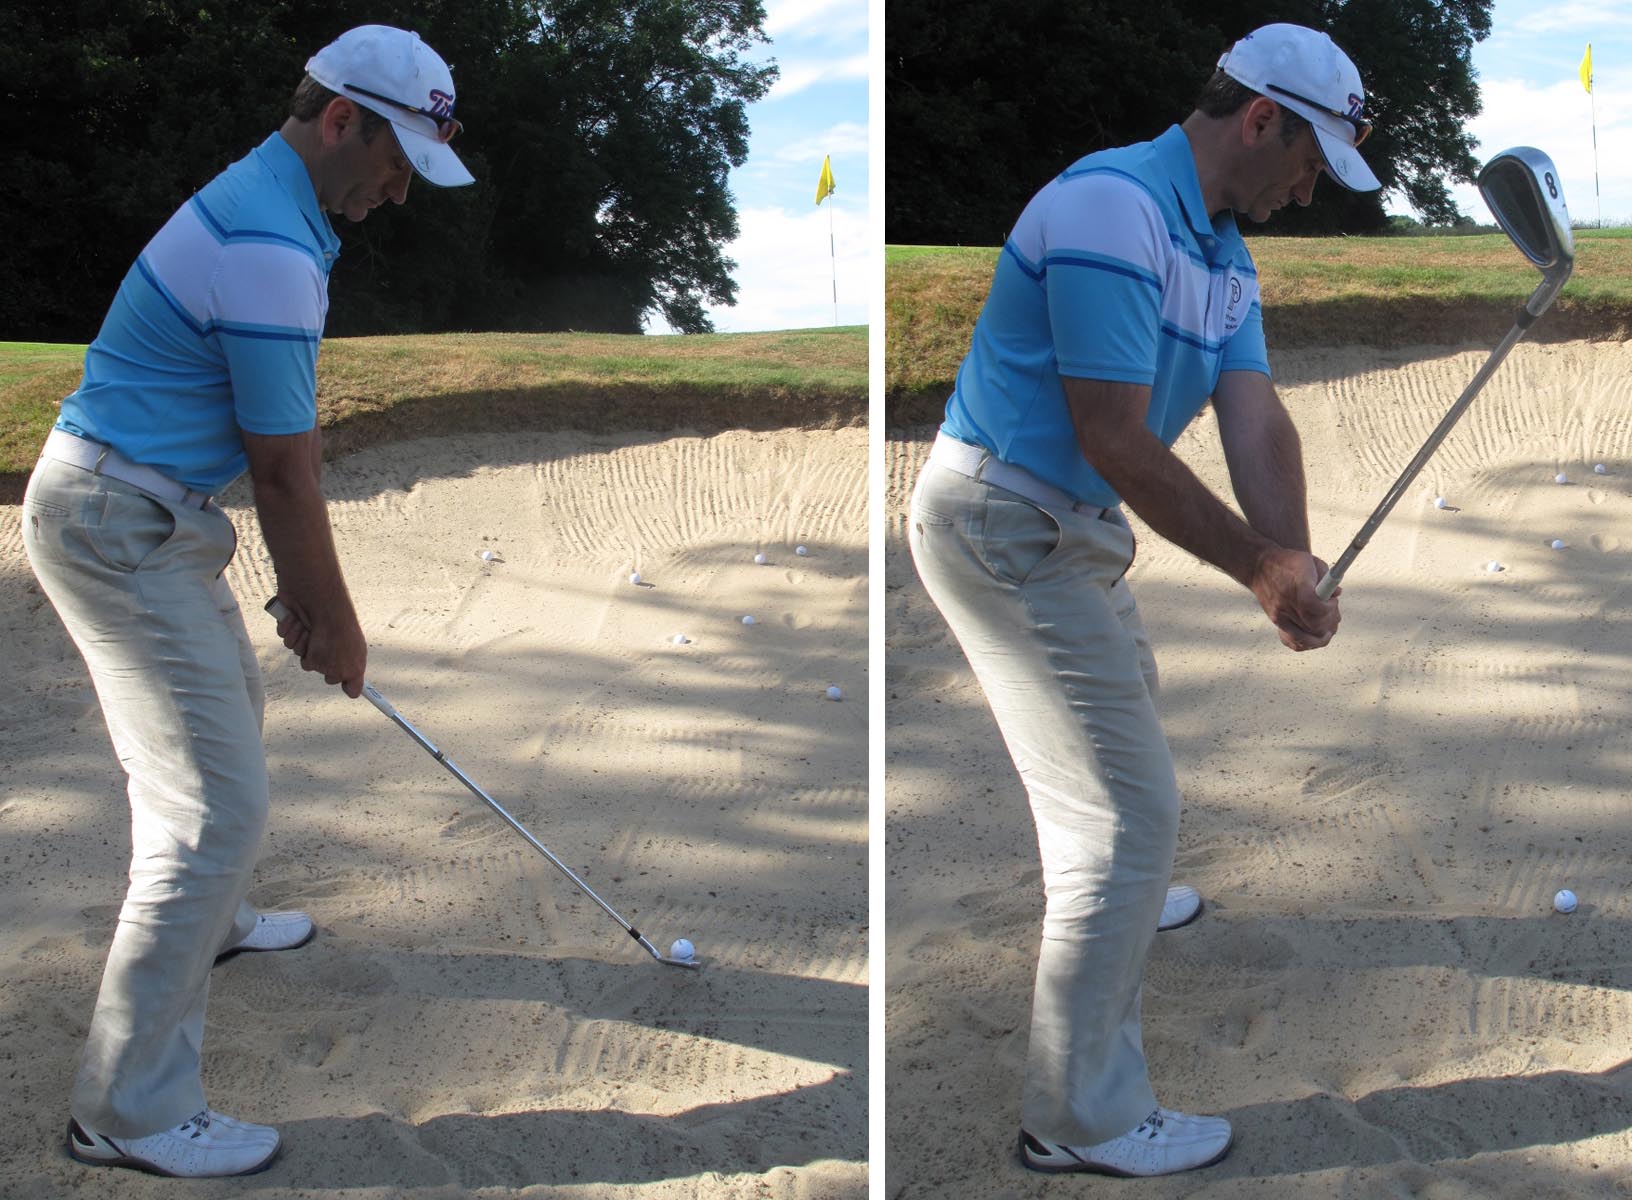 Tip 3: The 8-iron bunker shot drill